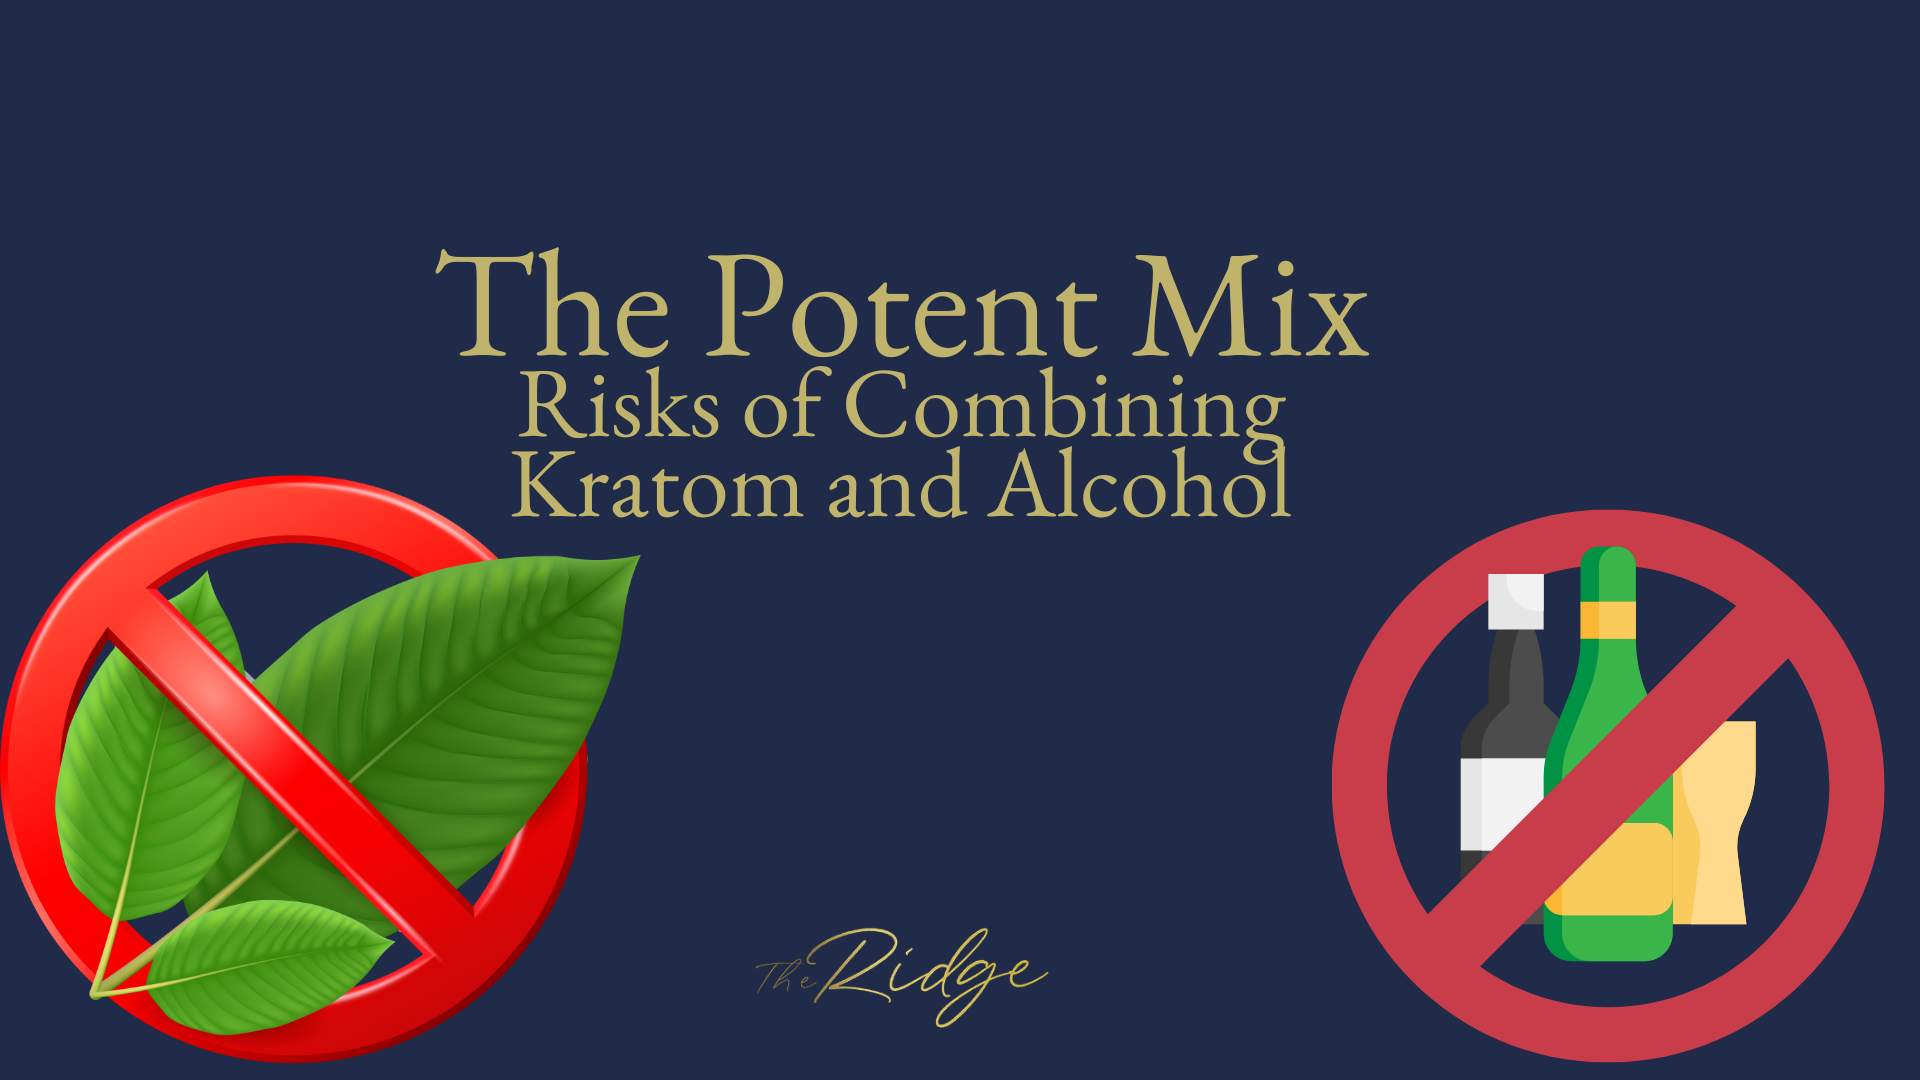 The Potent Mix: Risks of Combining Kratom and Alcohol